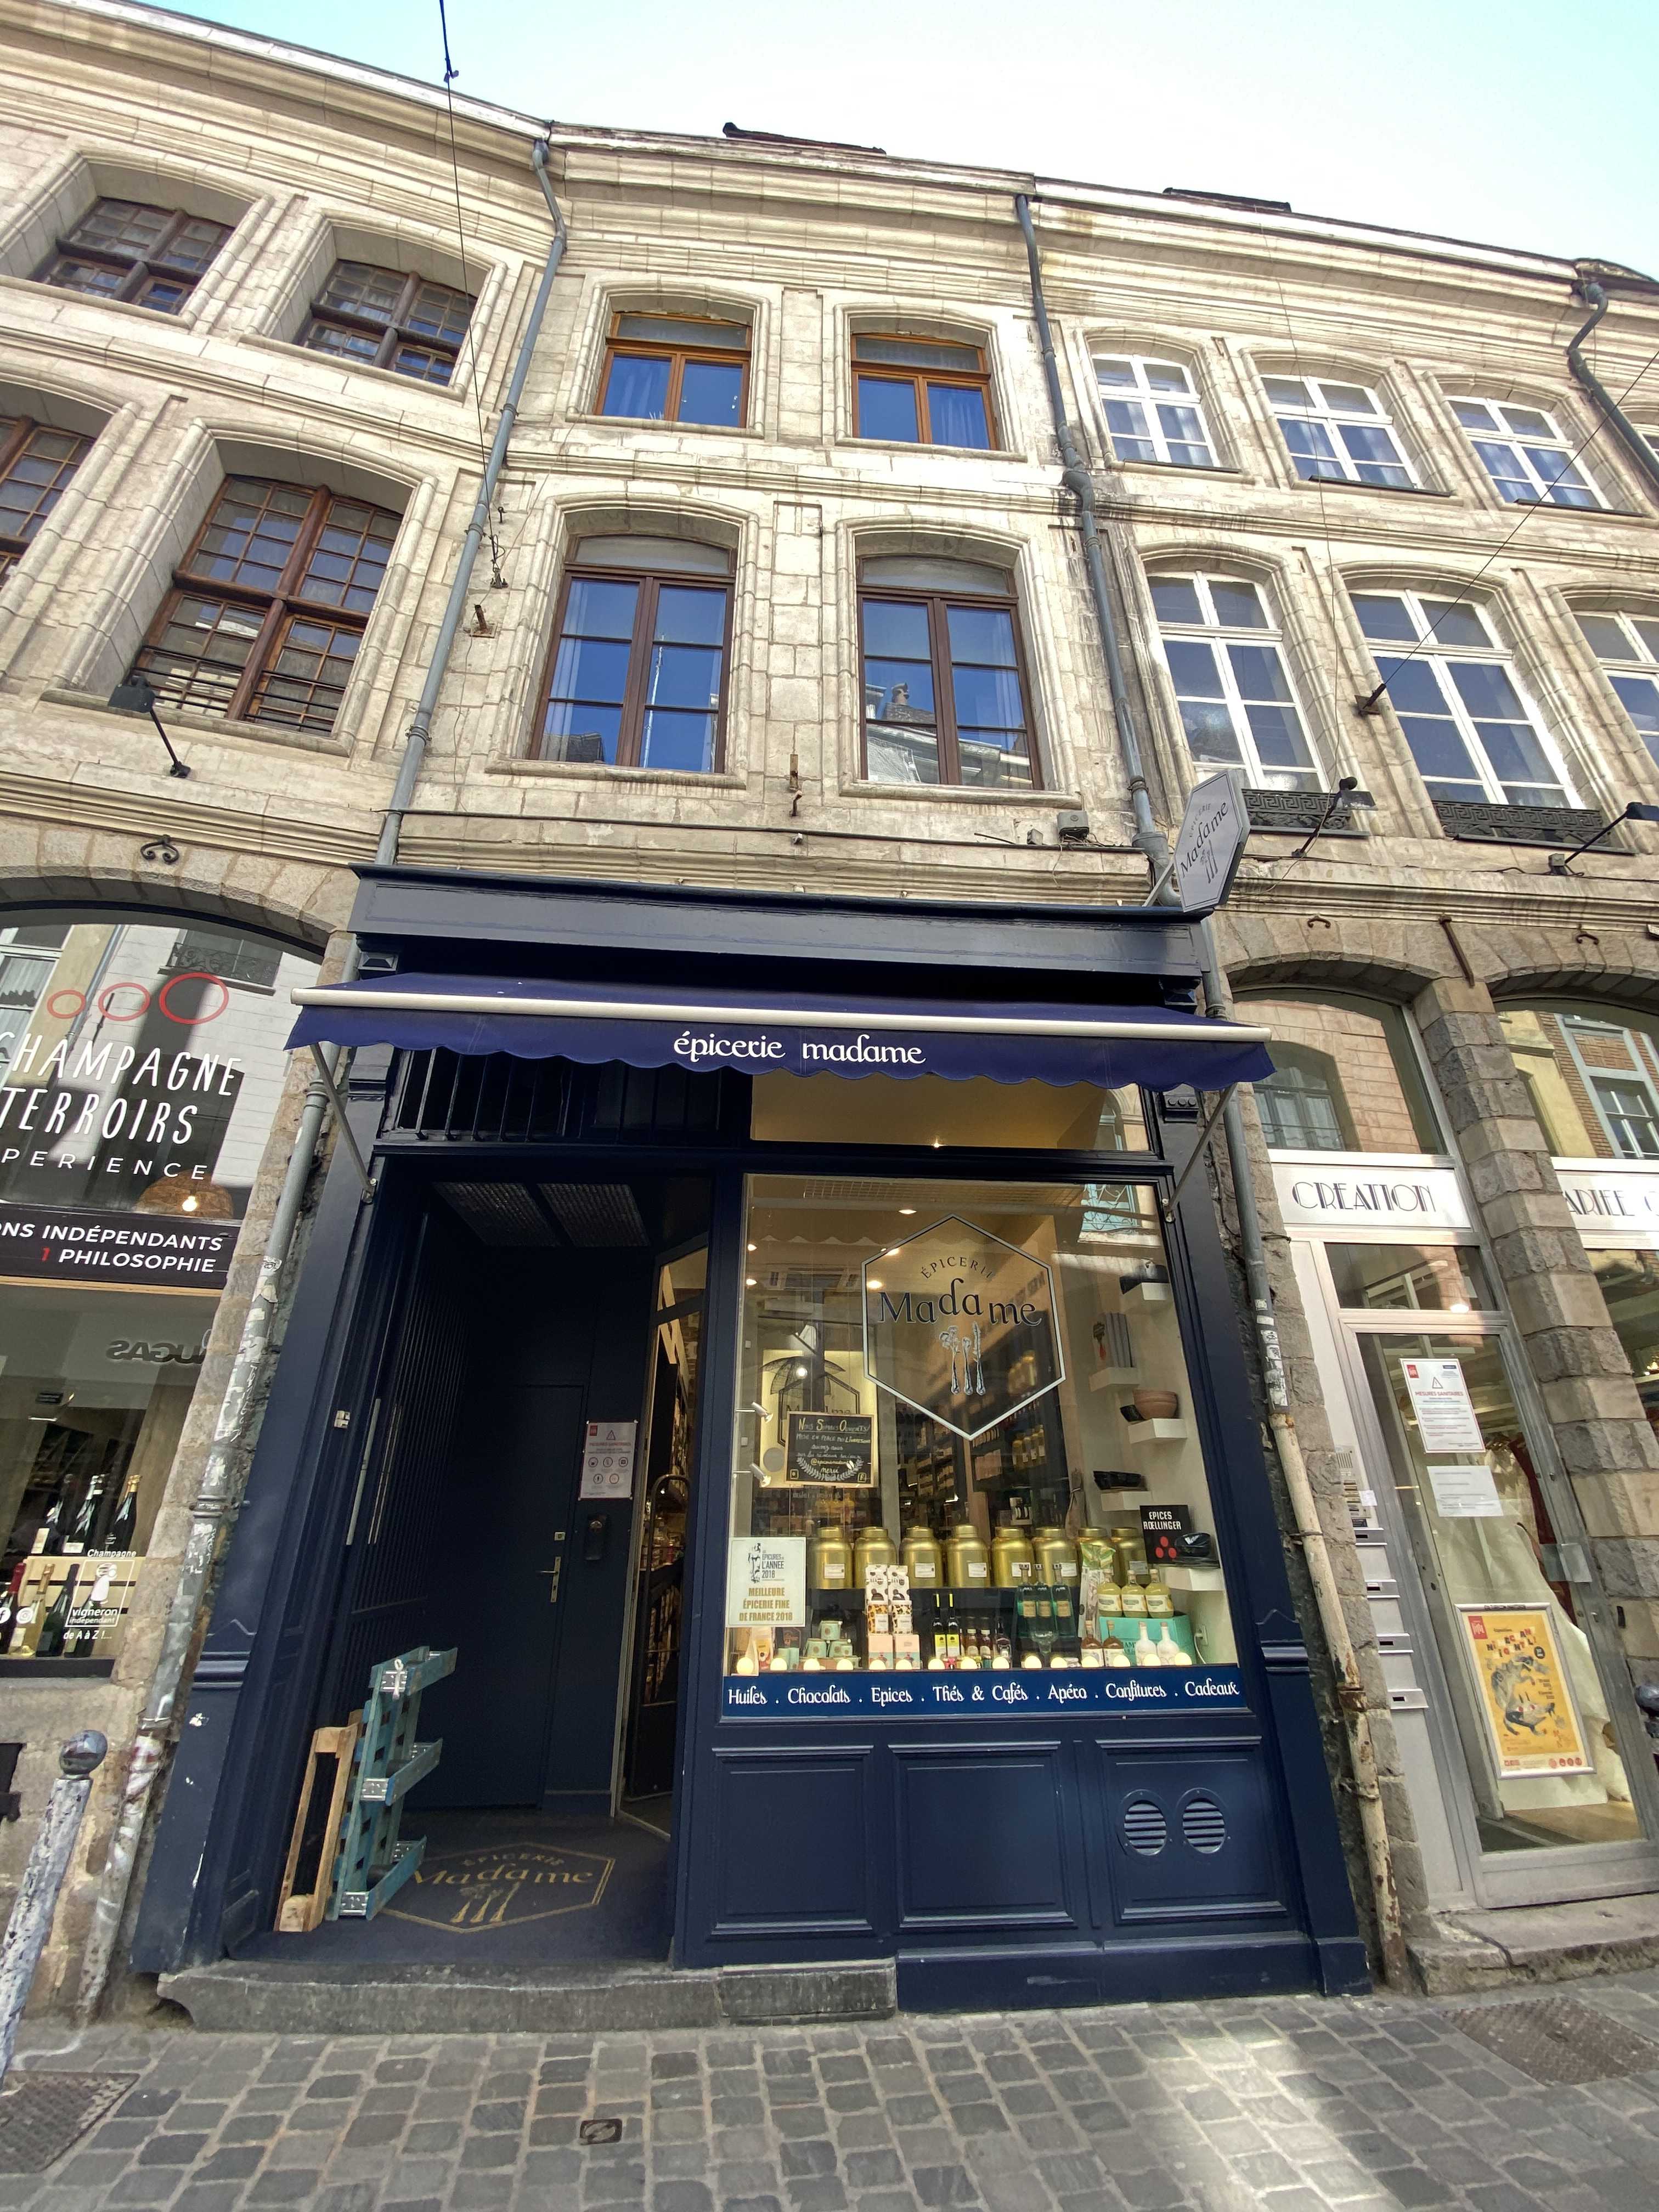 Epicerie Madame, Lille